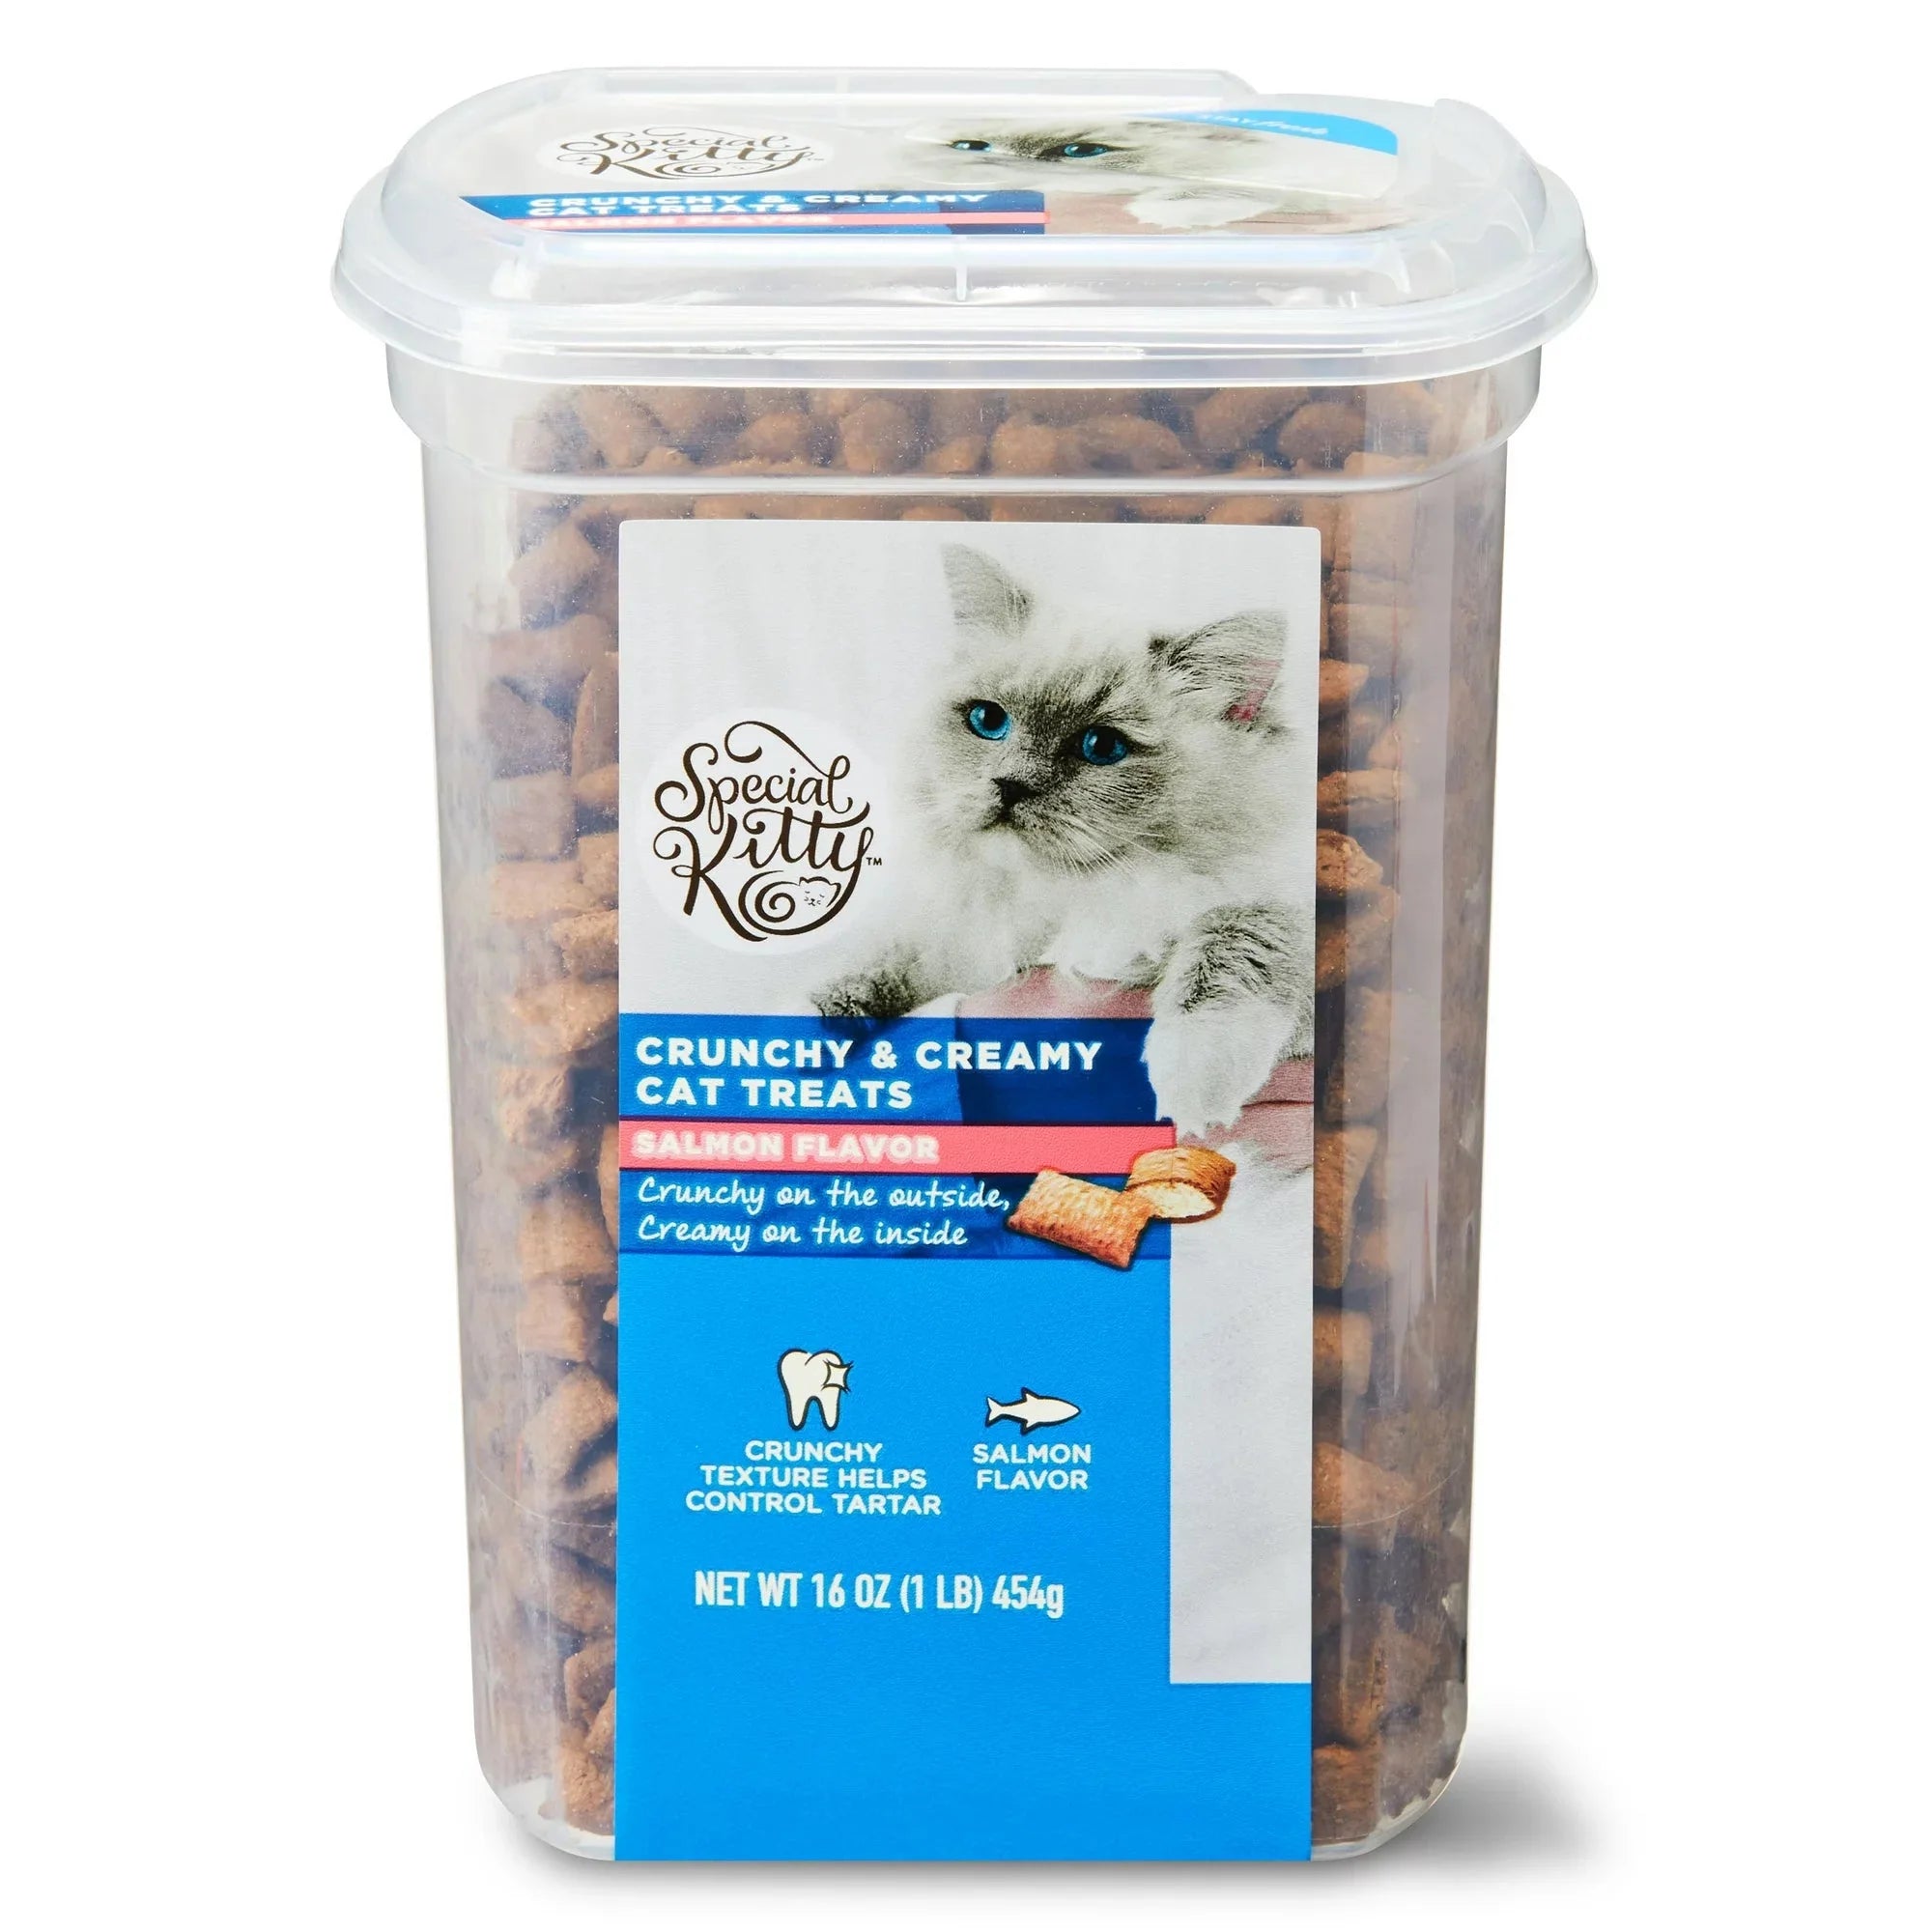 Wholesale prices with free shipping all over United States Special Kitty Crunchy & Creamy Cat Treats, Salmon Flavor, 16 oz - Steven Deals